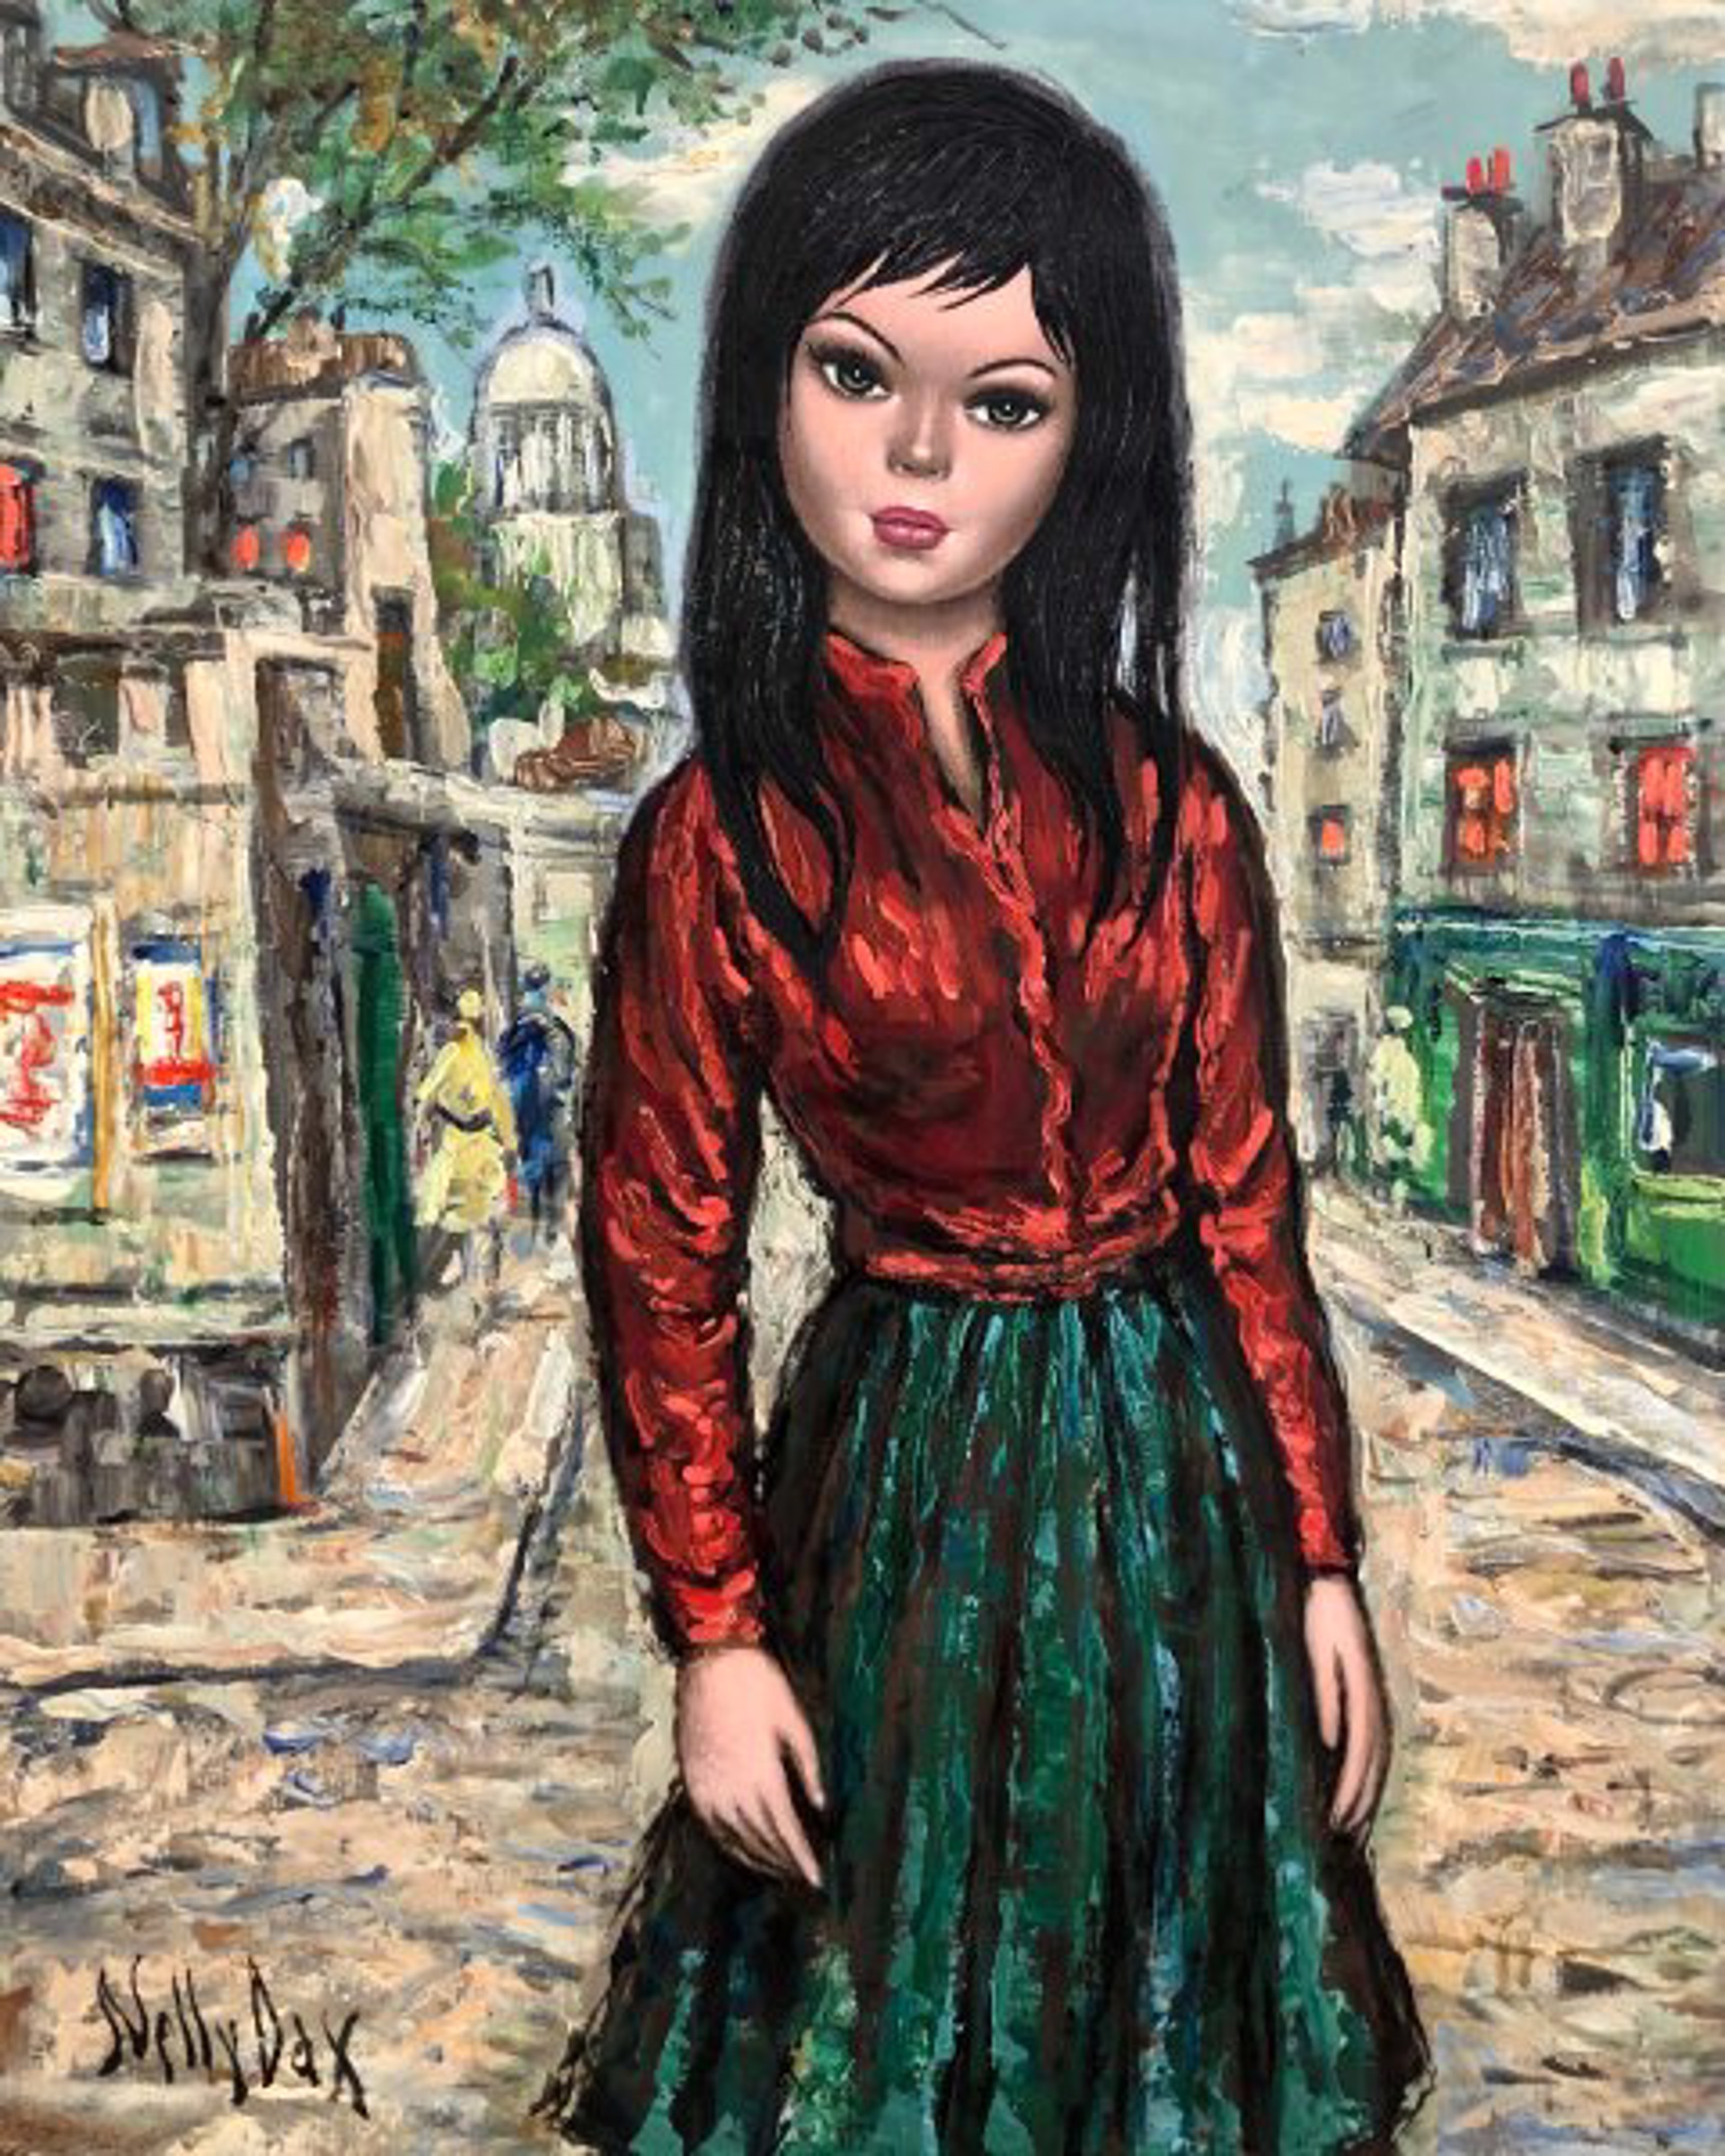 Girl in Montmartre, Sacre Coeur Paris by Nelly Dax